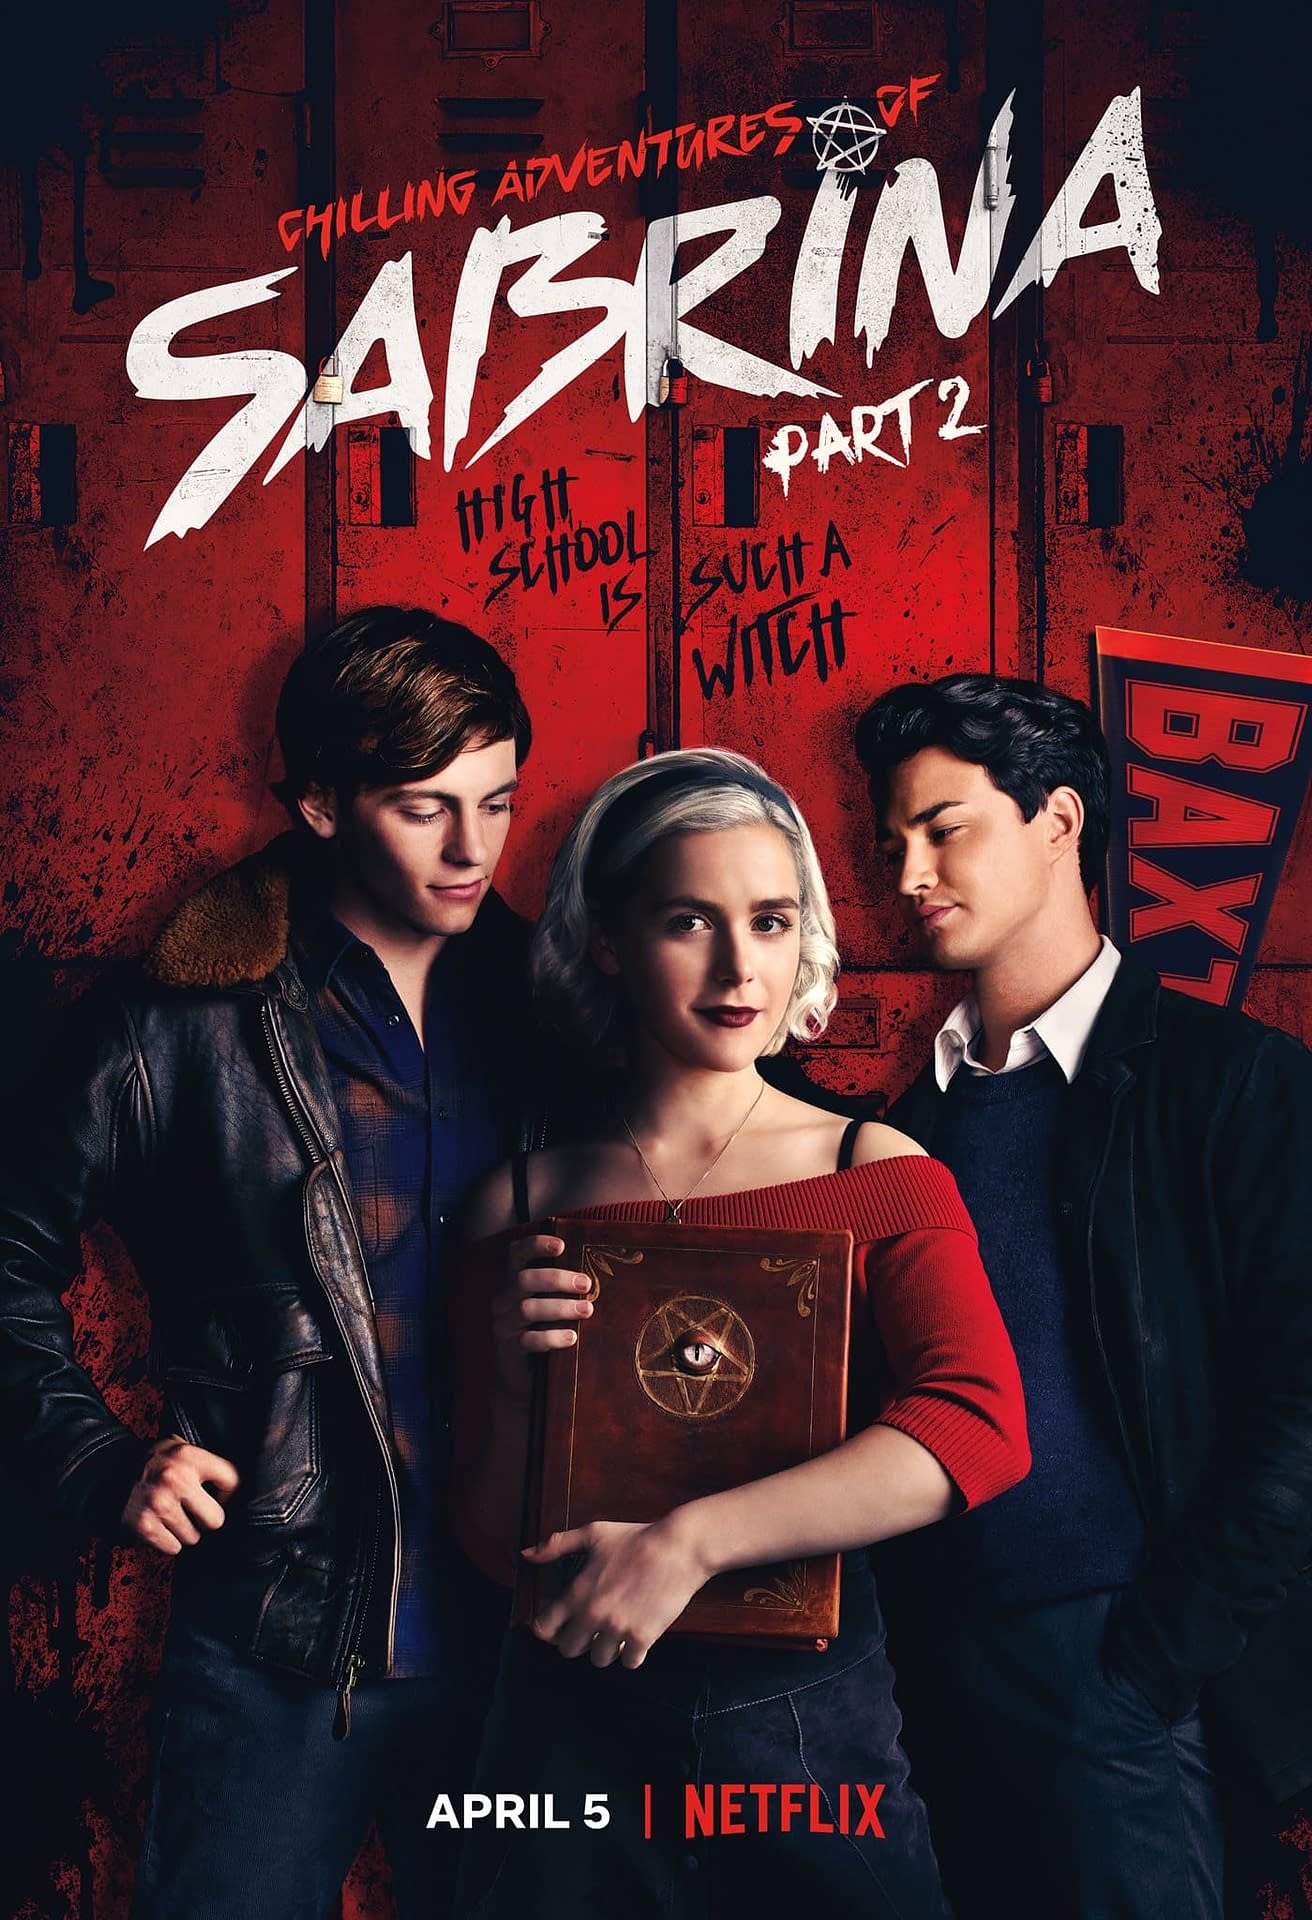 'Chilling Adventures of Sabrina': High School is Such a Witch in New Part 2 Poster